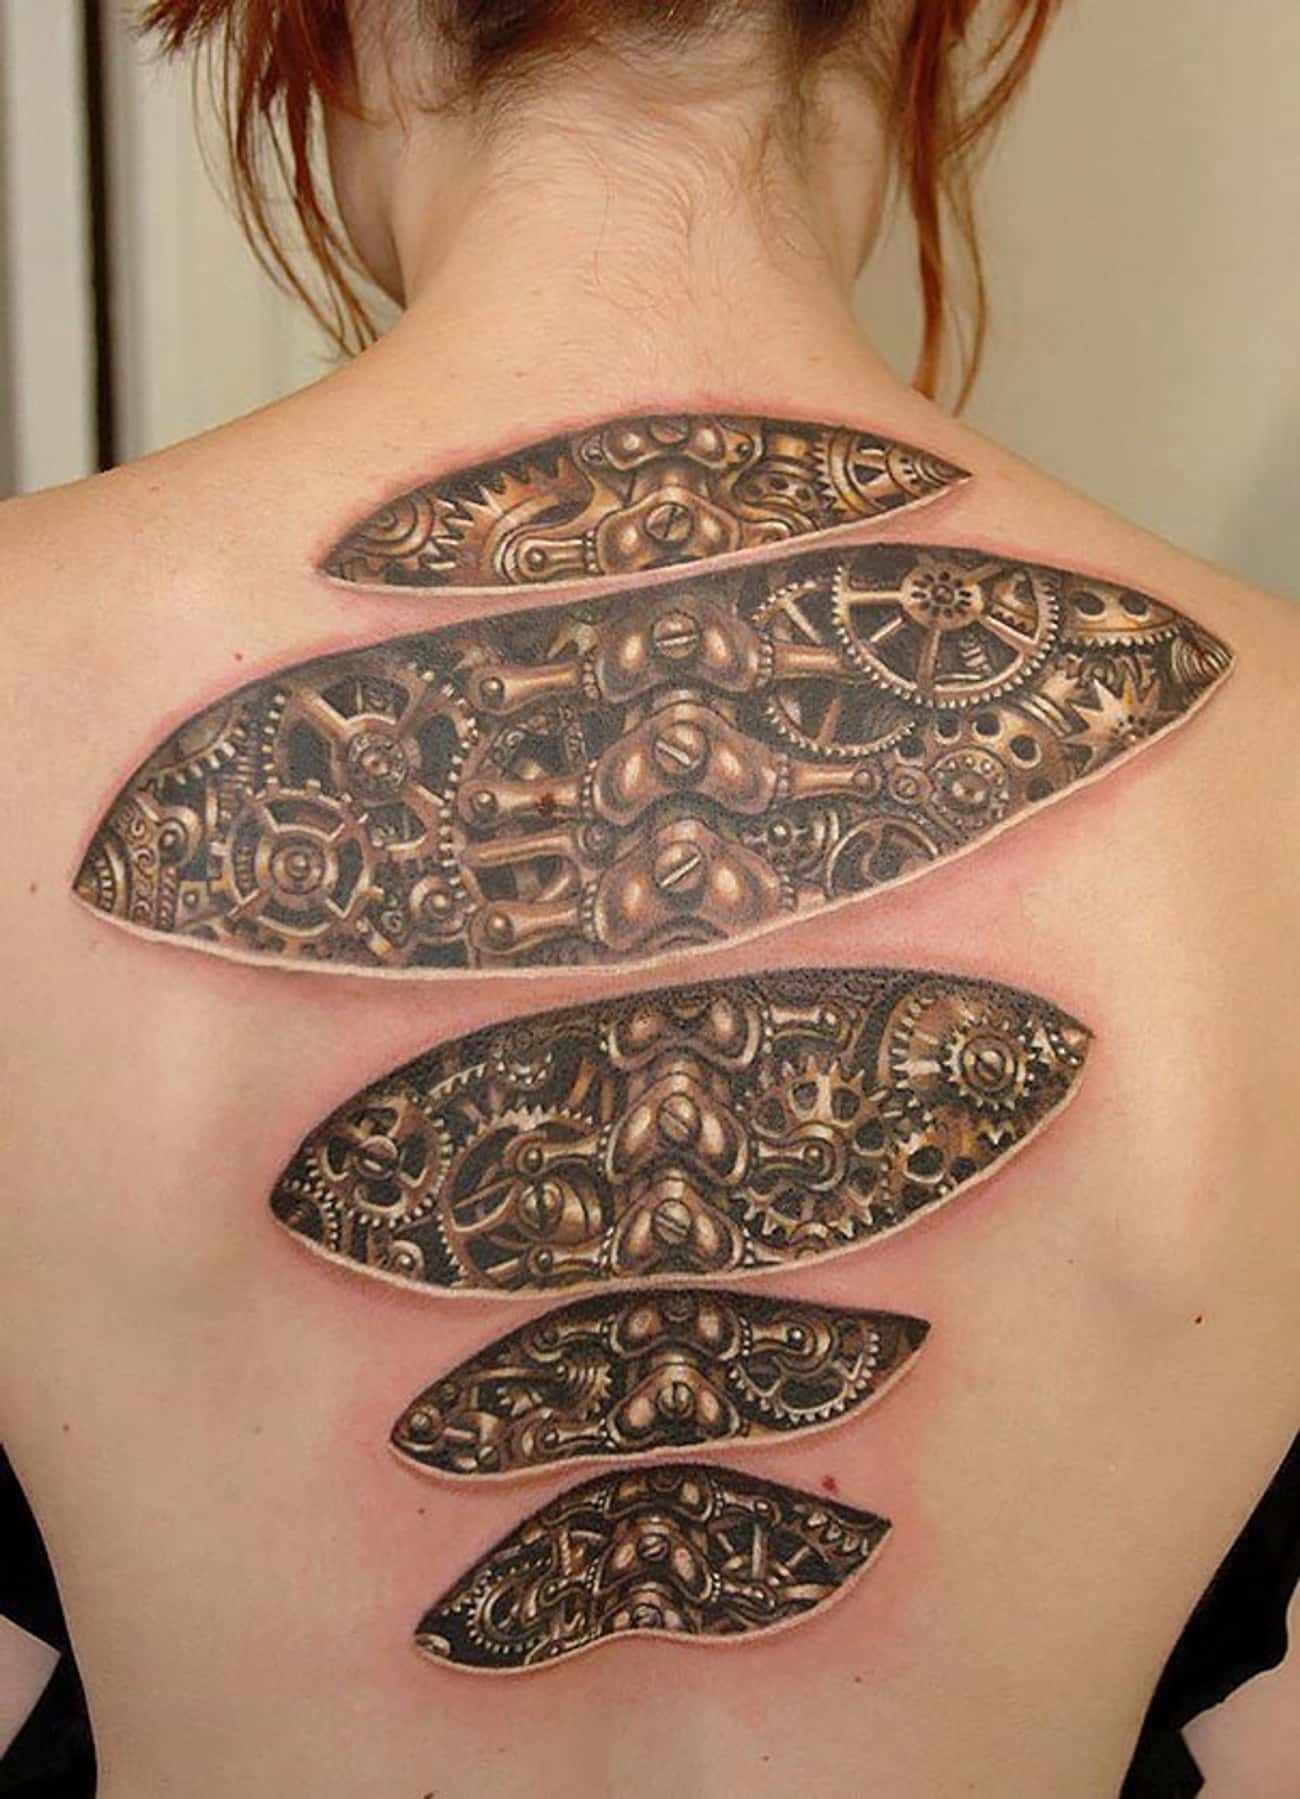 This Steampunk Back Tattoo Is the Perfect Combination of Sci-Fi and Mechanics